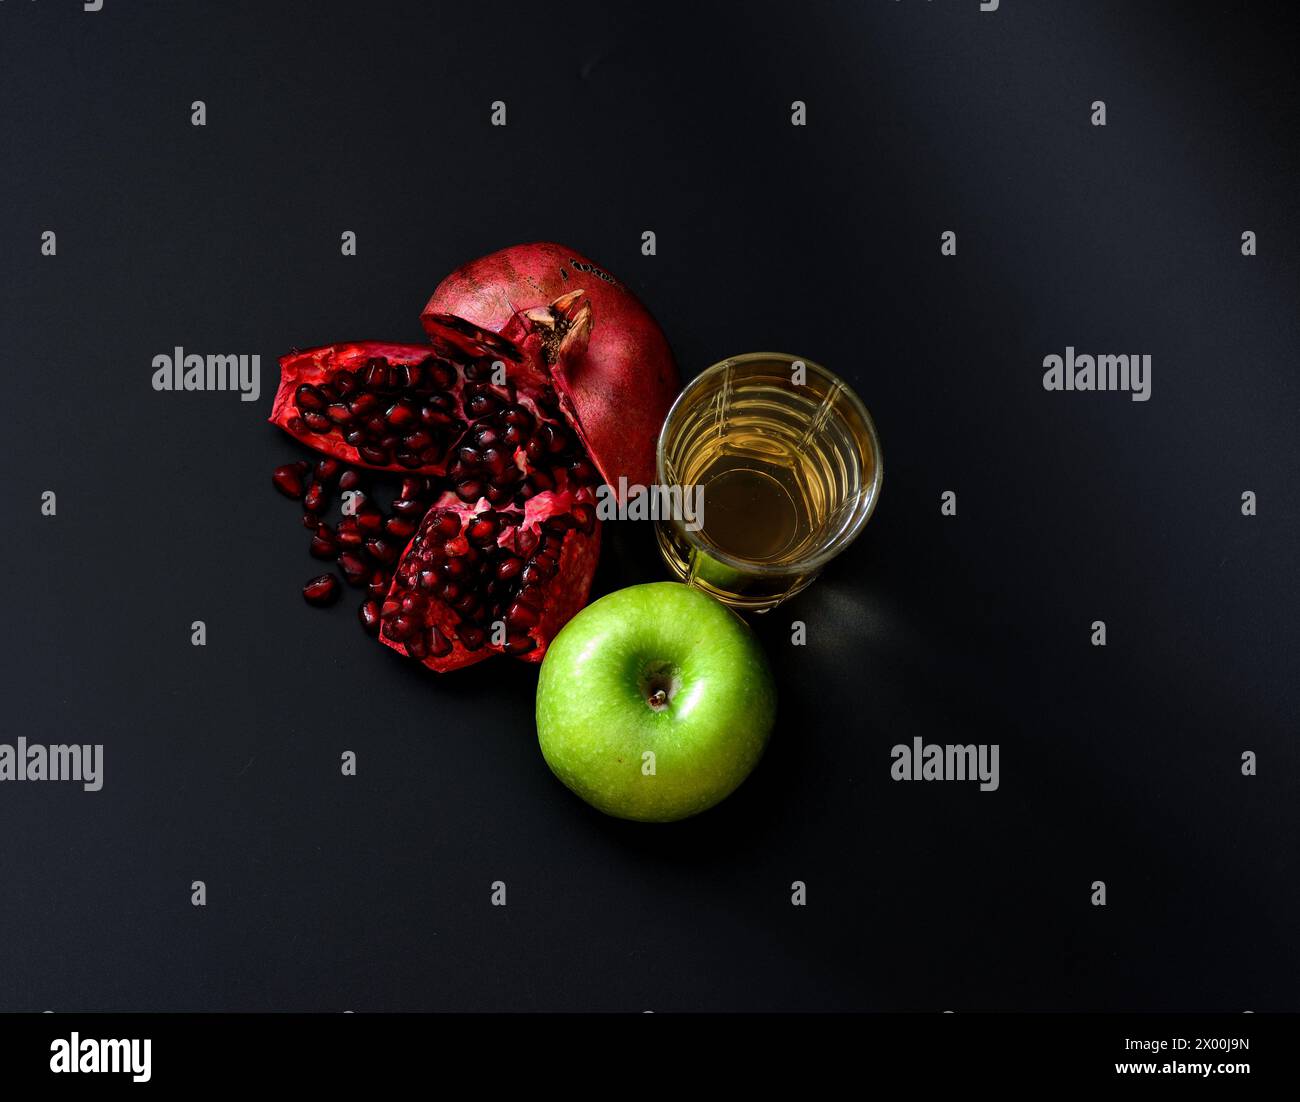 A tall glass of freshly squeezed fruit juice on a black background, next to a broken pomegranate fruit with seeds and a ripe green apple. Top view, fl Stock Photo